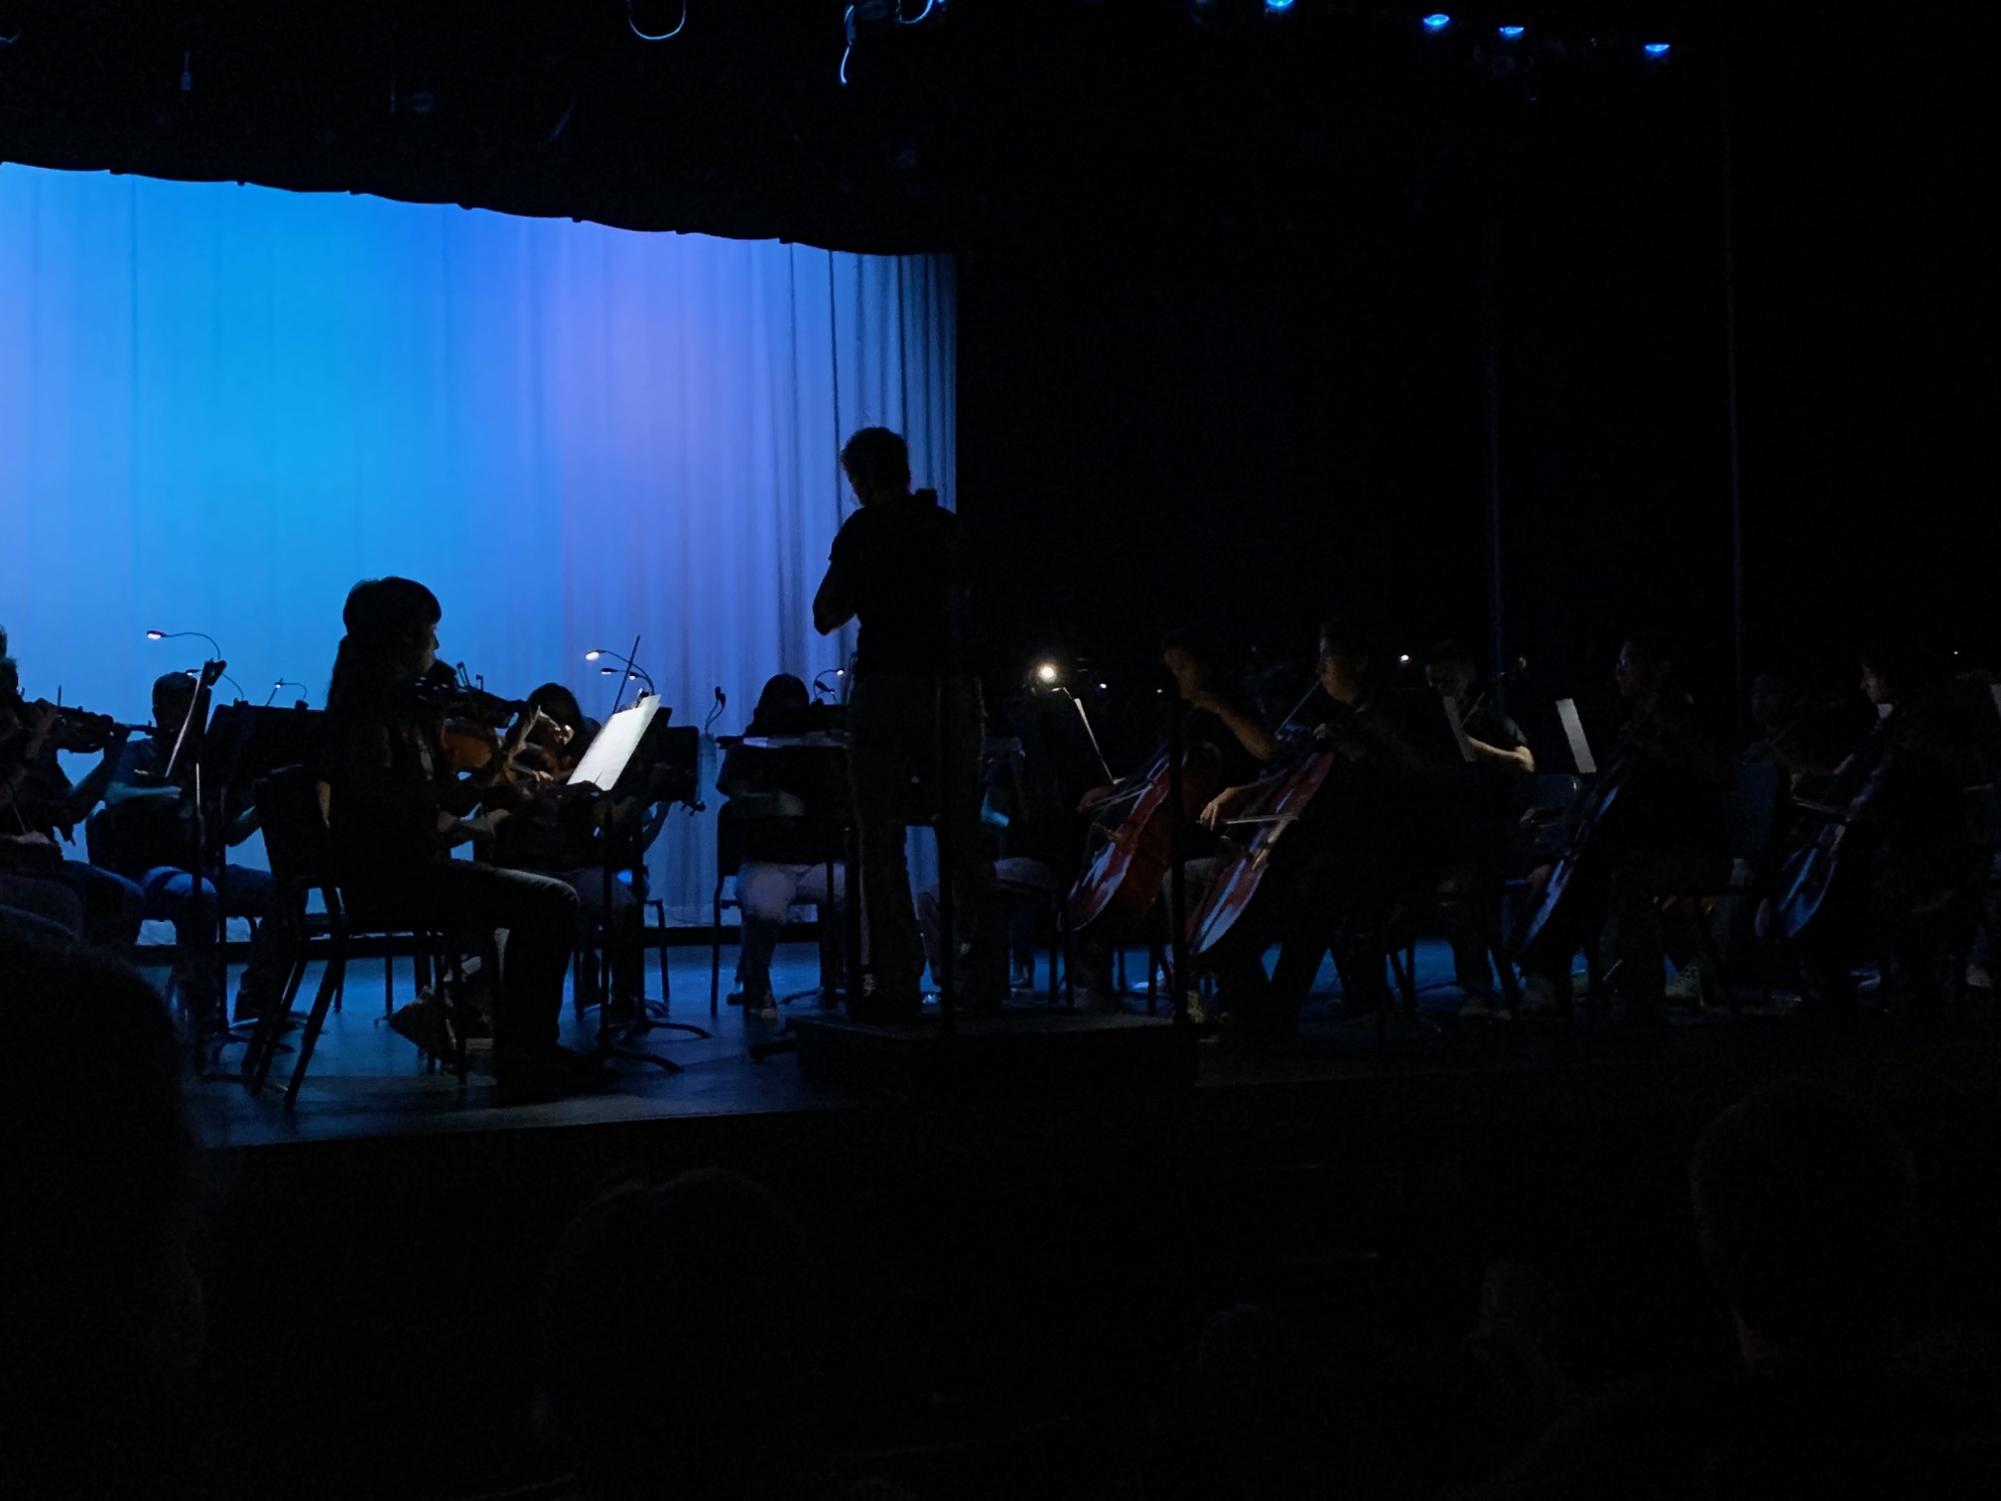 One of Communitys orchestra classes performed a sneak preview of the Hauntcert for staff members during Oct. 18s half day.
Photo Courtesy of: Brad Bovenkerk